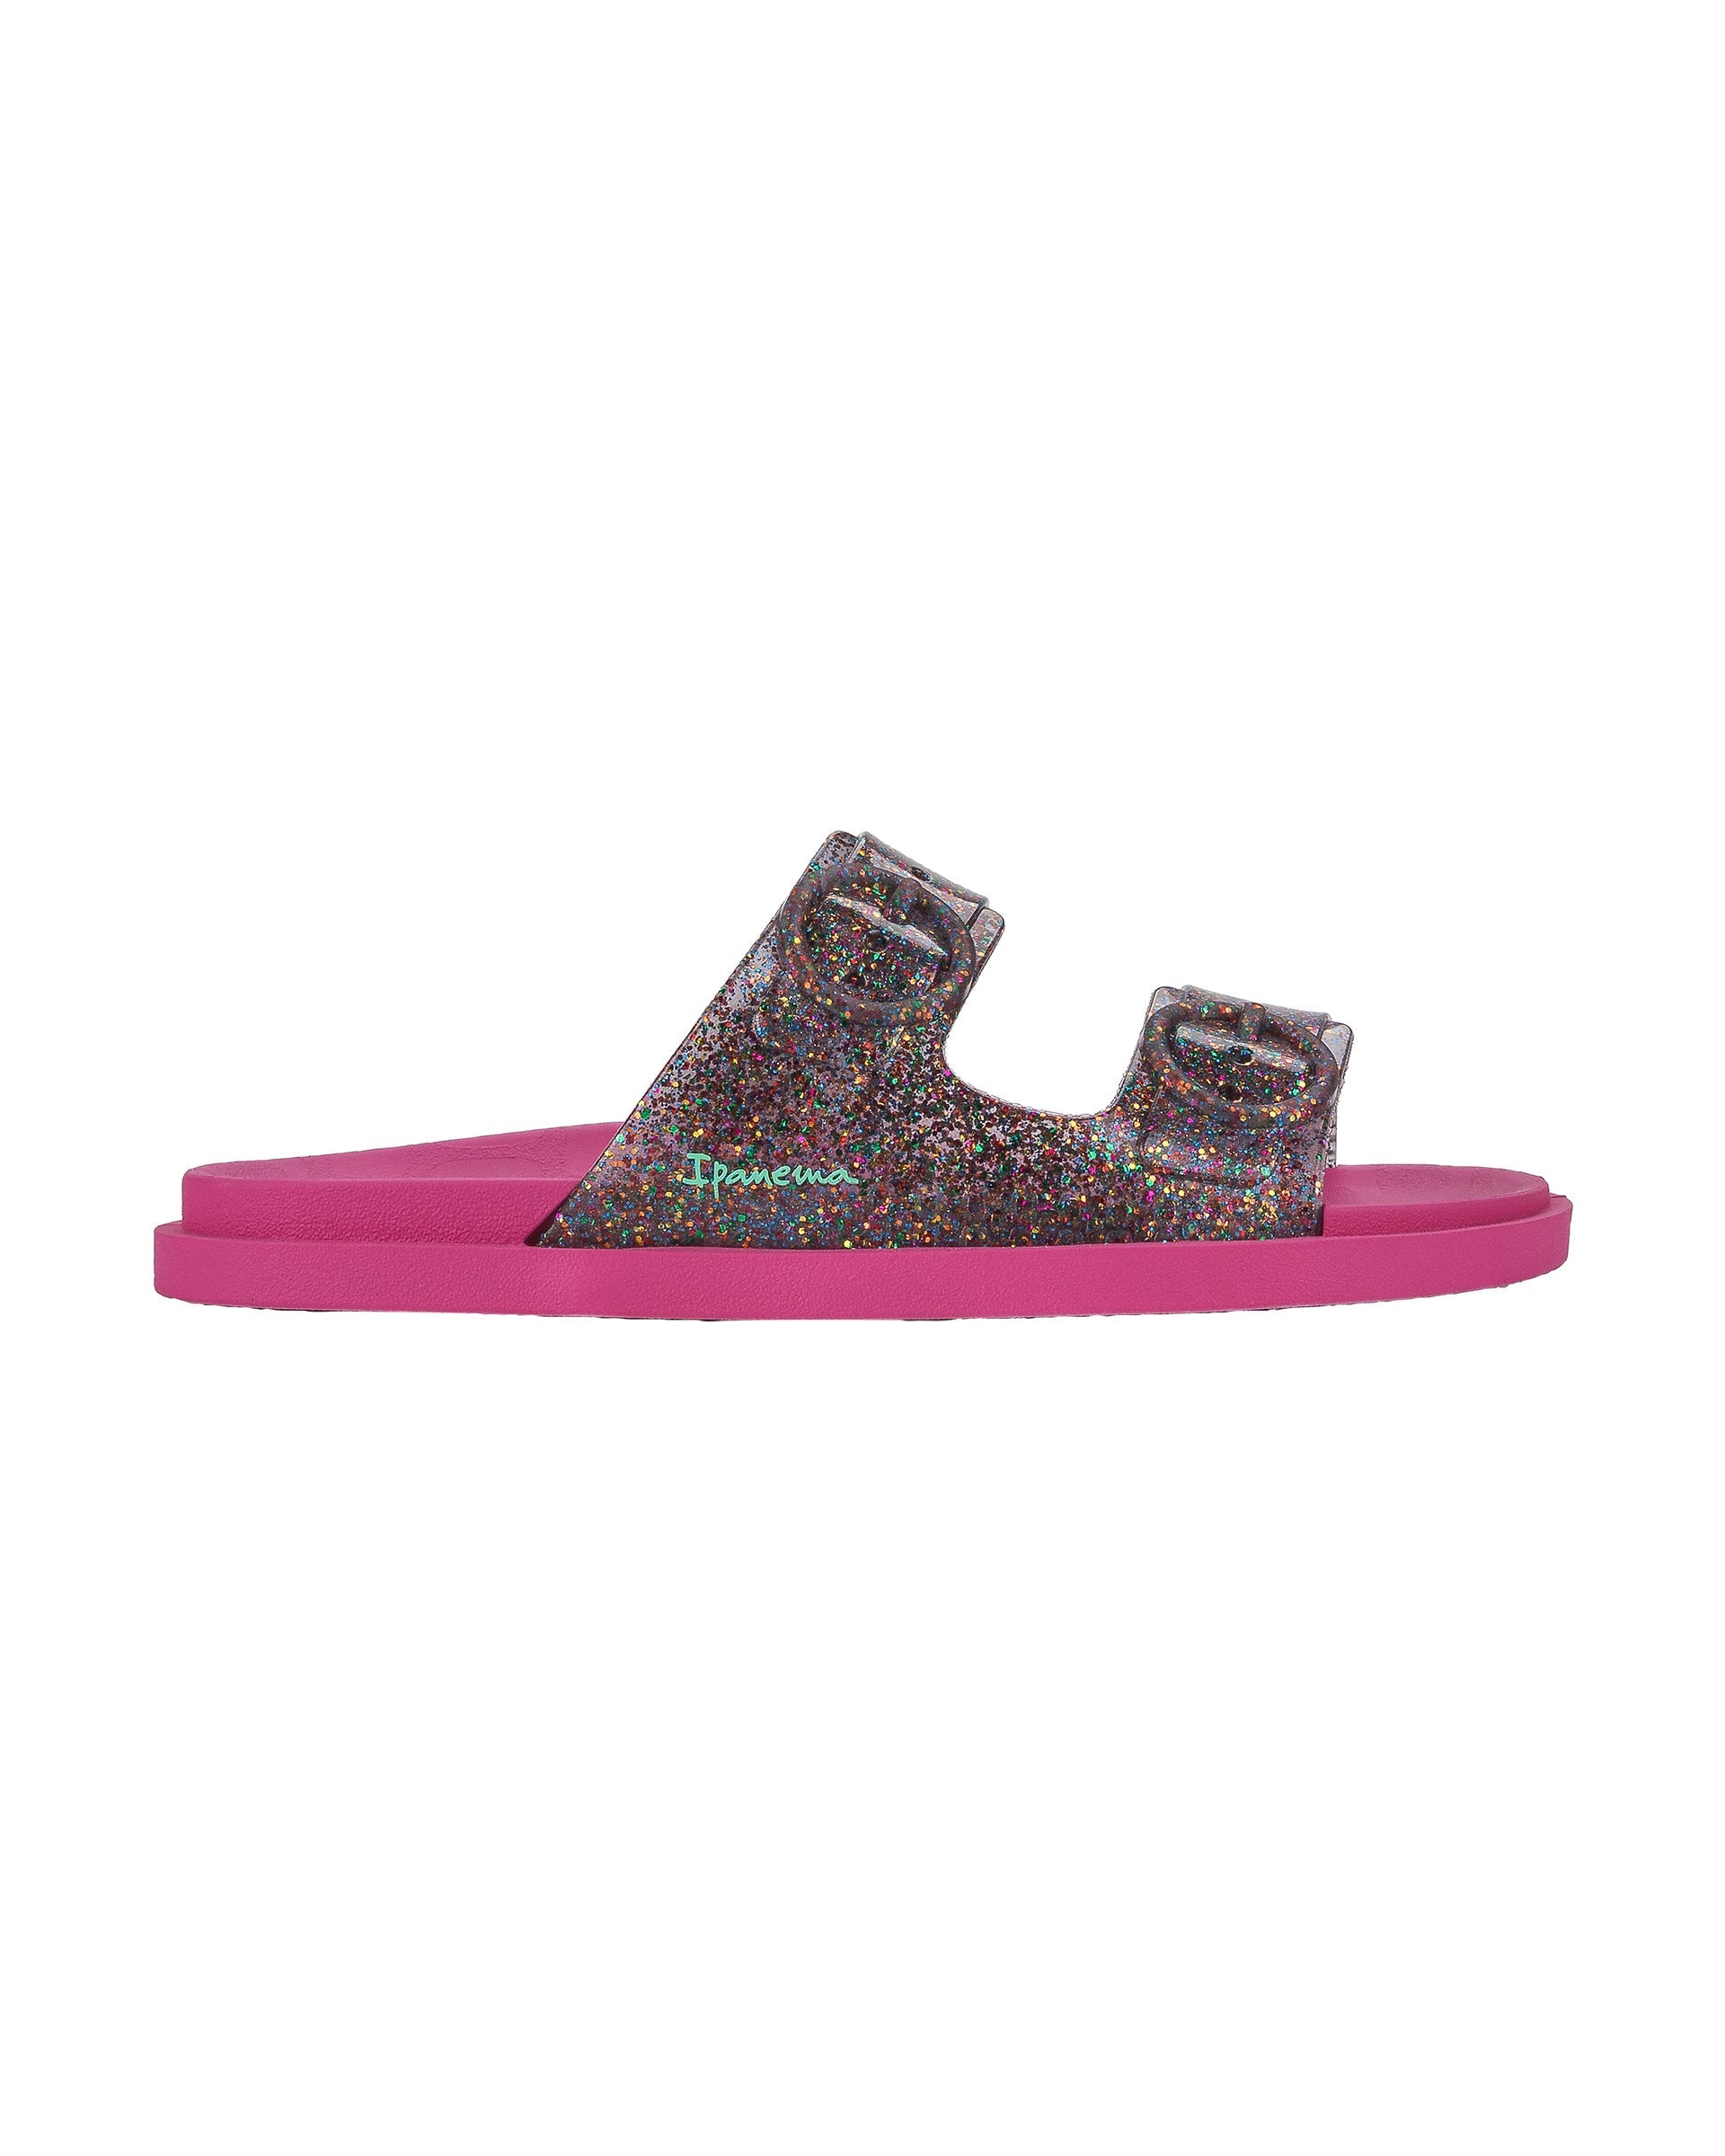 Outer side view of a pink Ipanema Follow kids slide with a multicolor glitter upper.